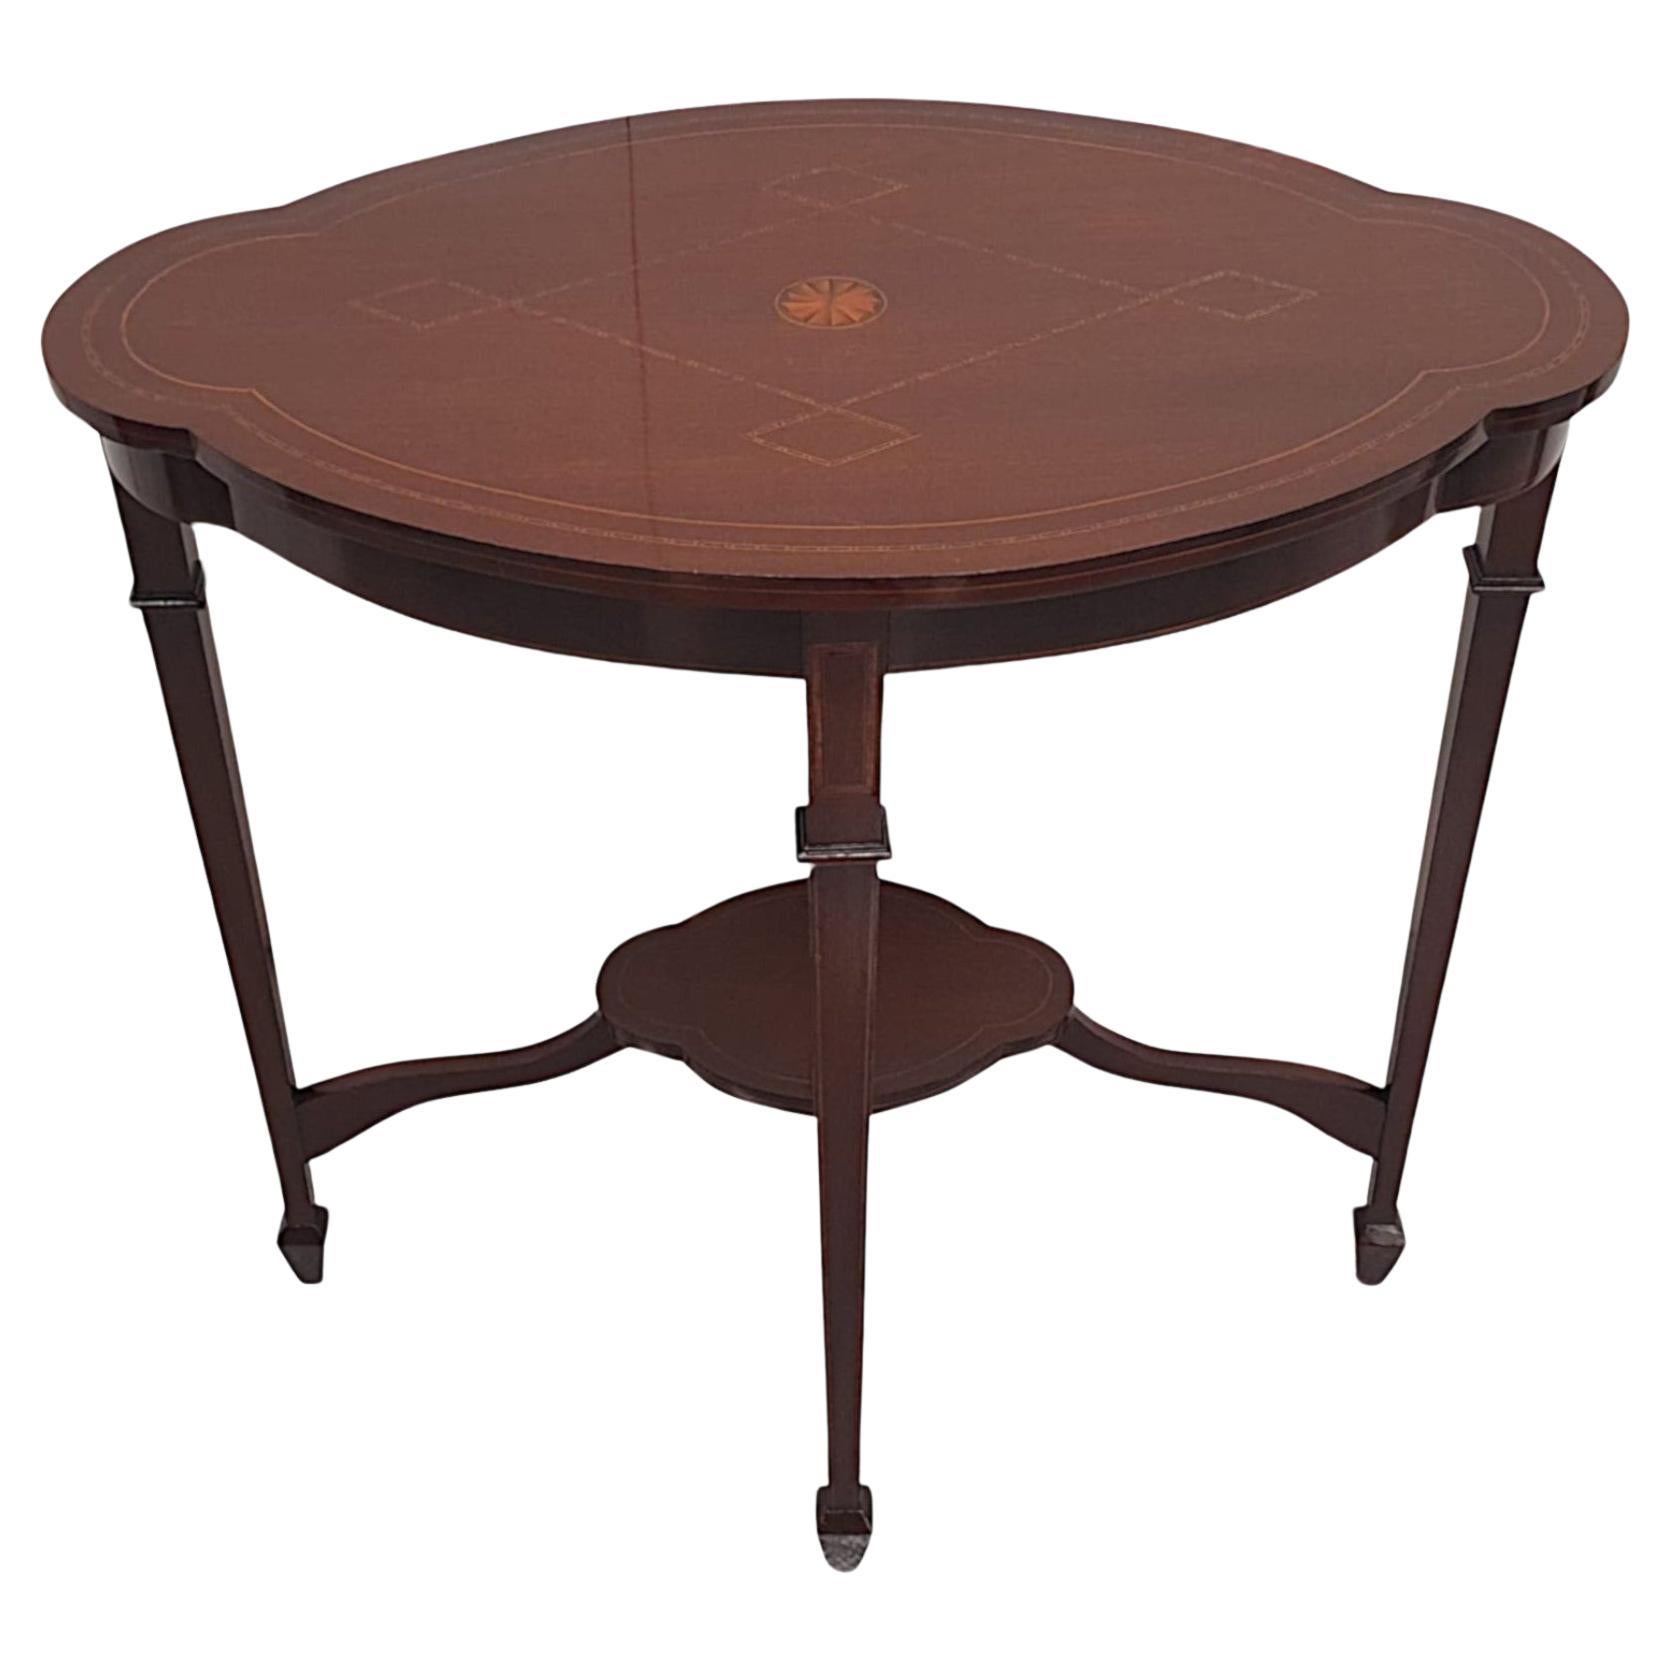  A Gorgeous Edwardian Marquetry Inlaid Occasional Table